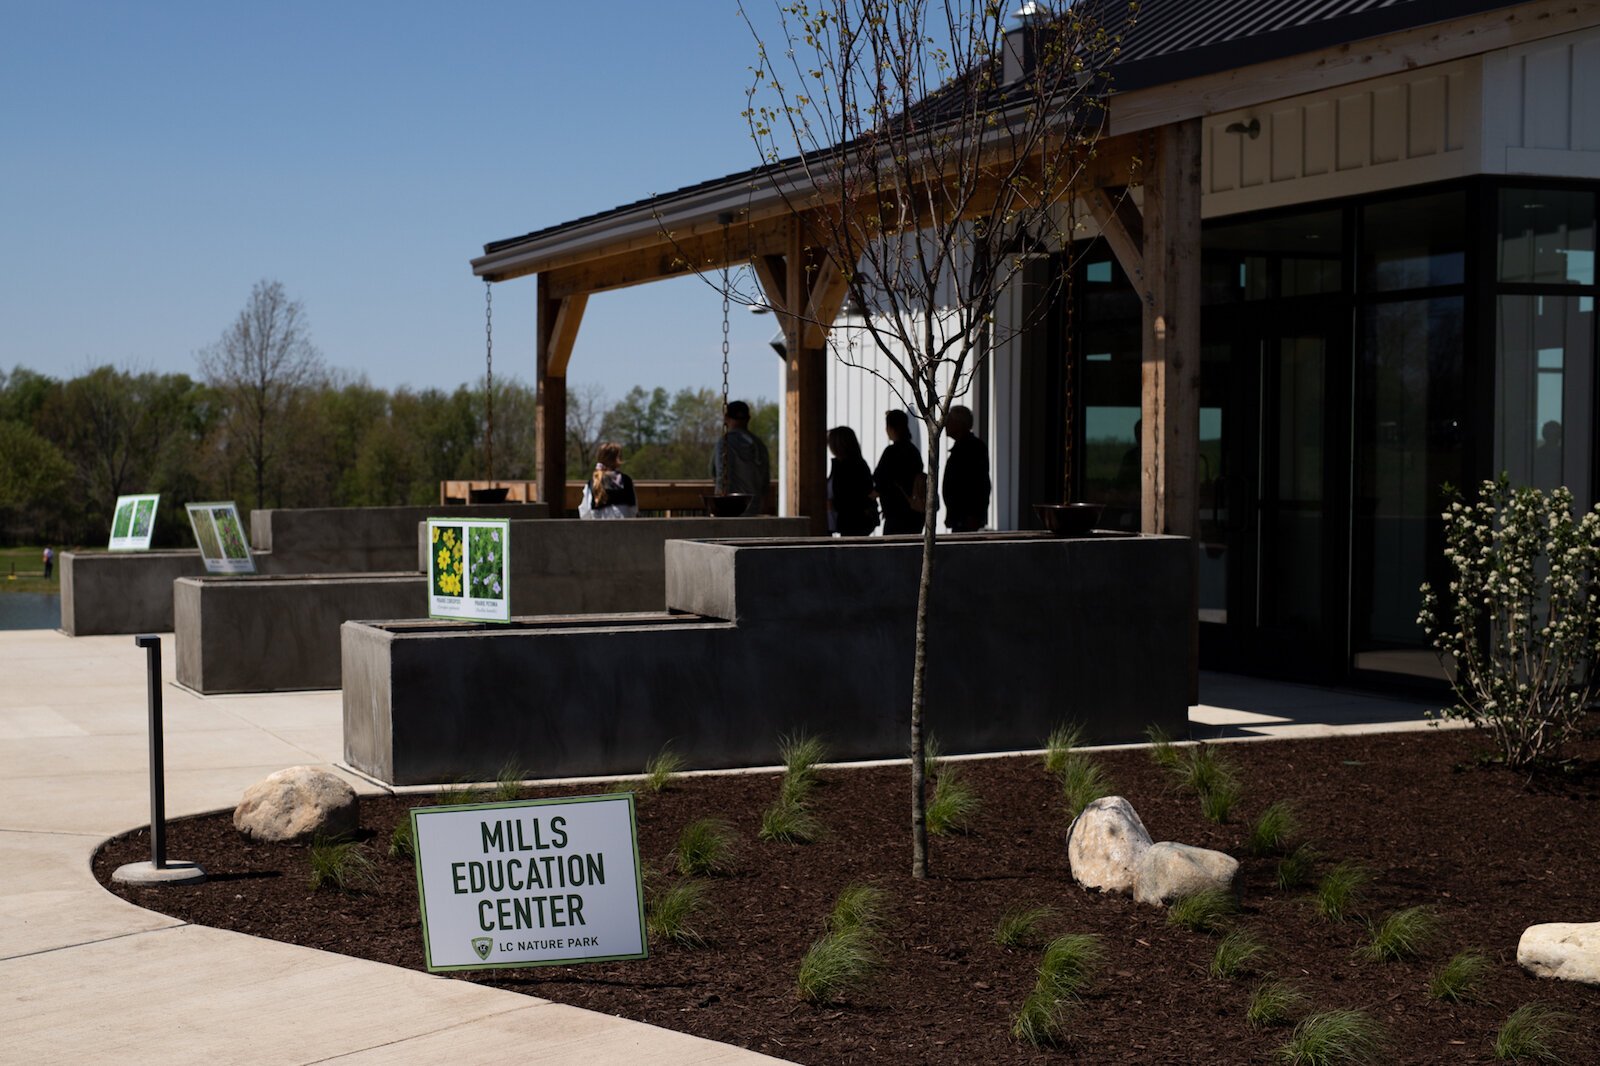 LC Nature Park opened in May 2021 at 9744 Aboite Rd in Roanoke.